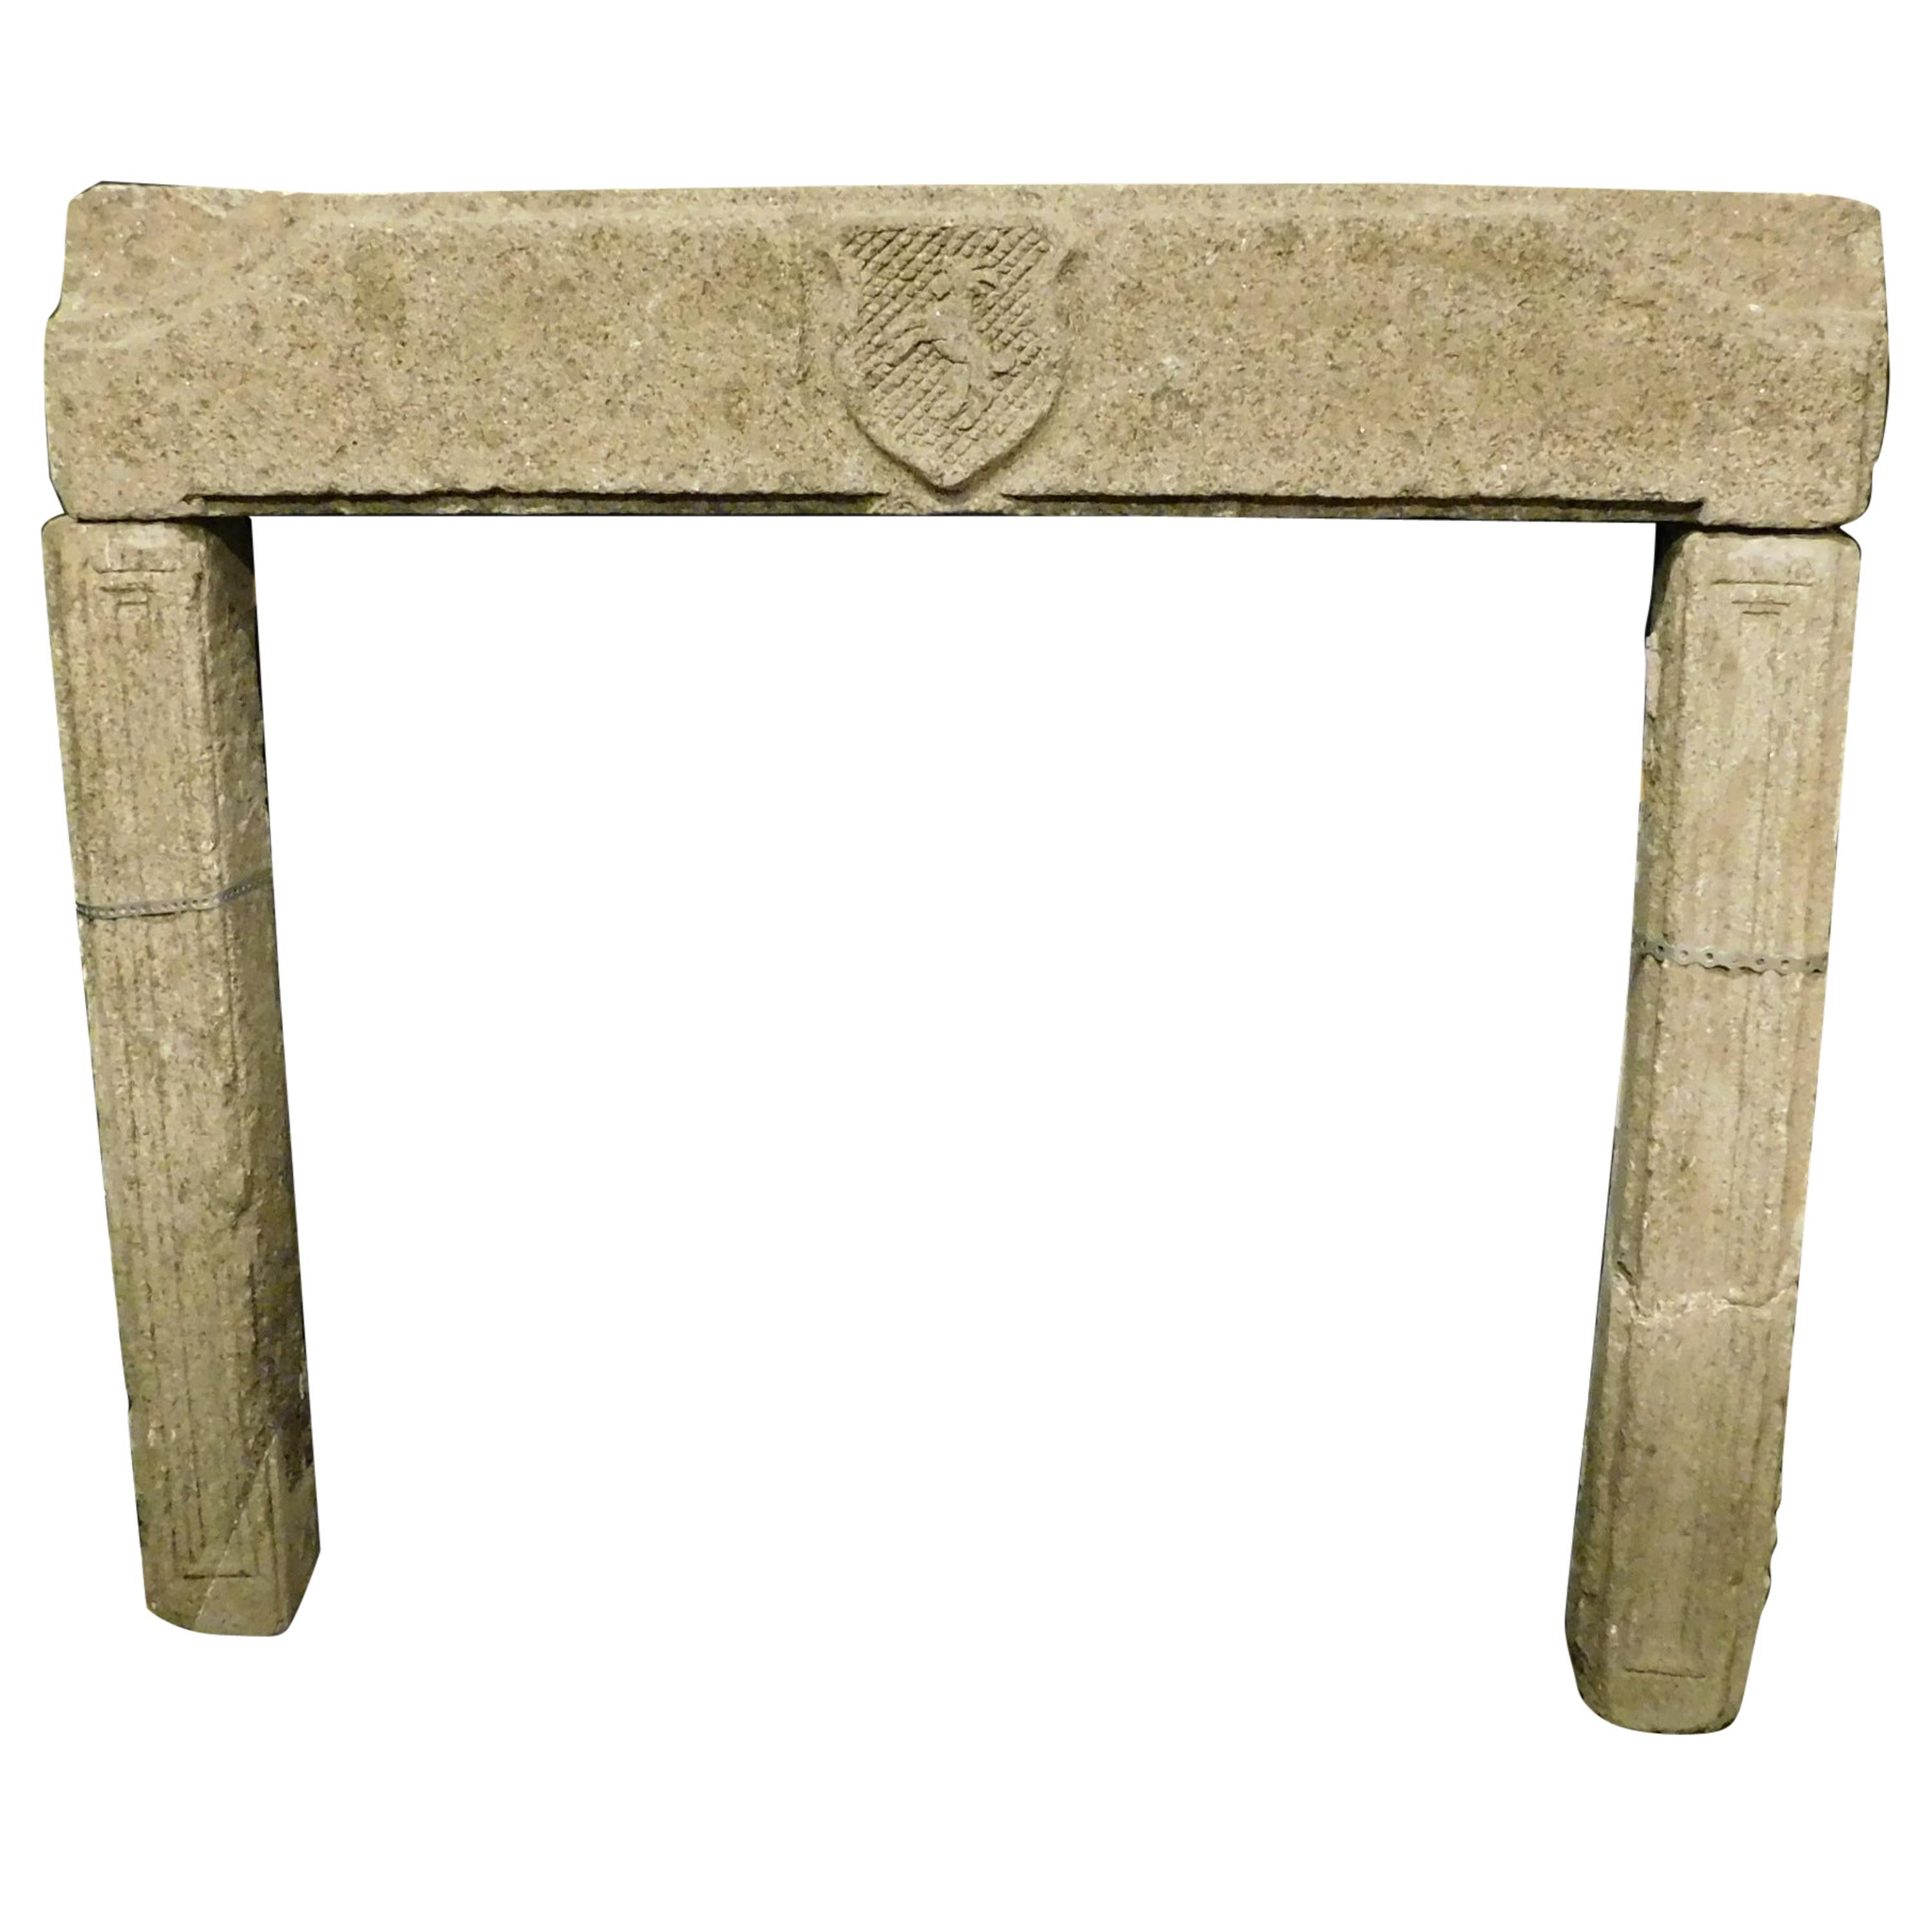 Antique Carved Stone Fireplace with Coat of Arms, 1700, Italy